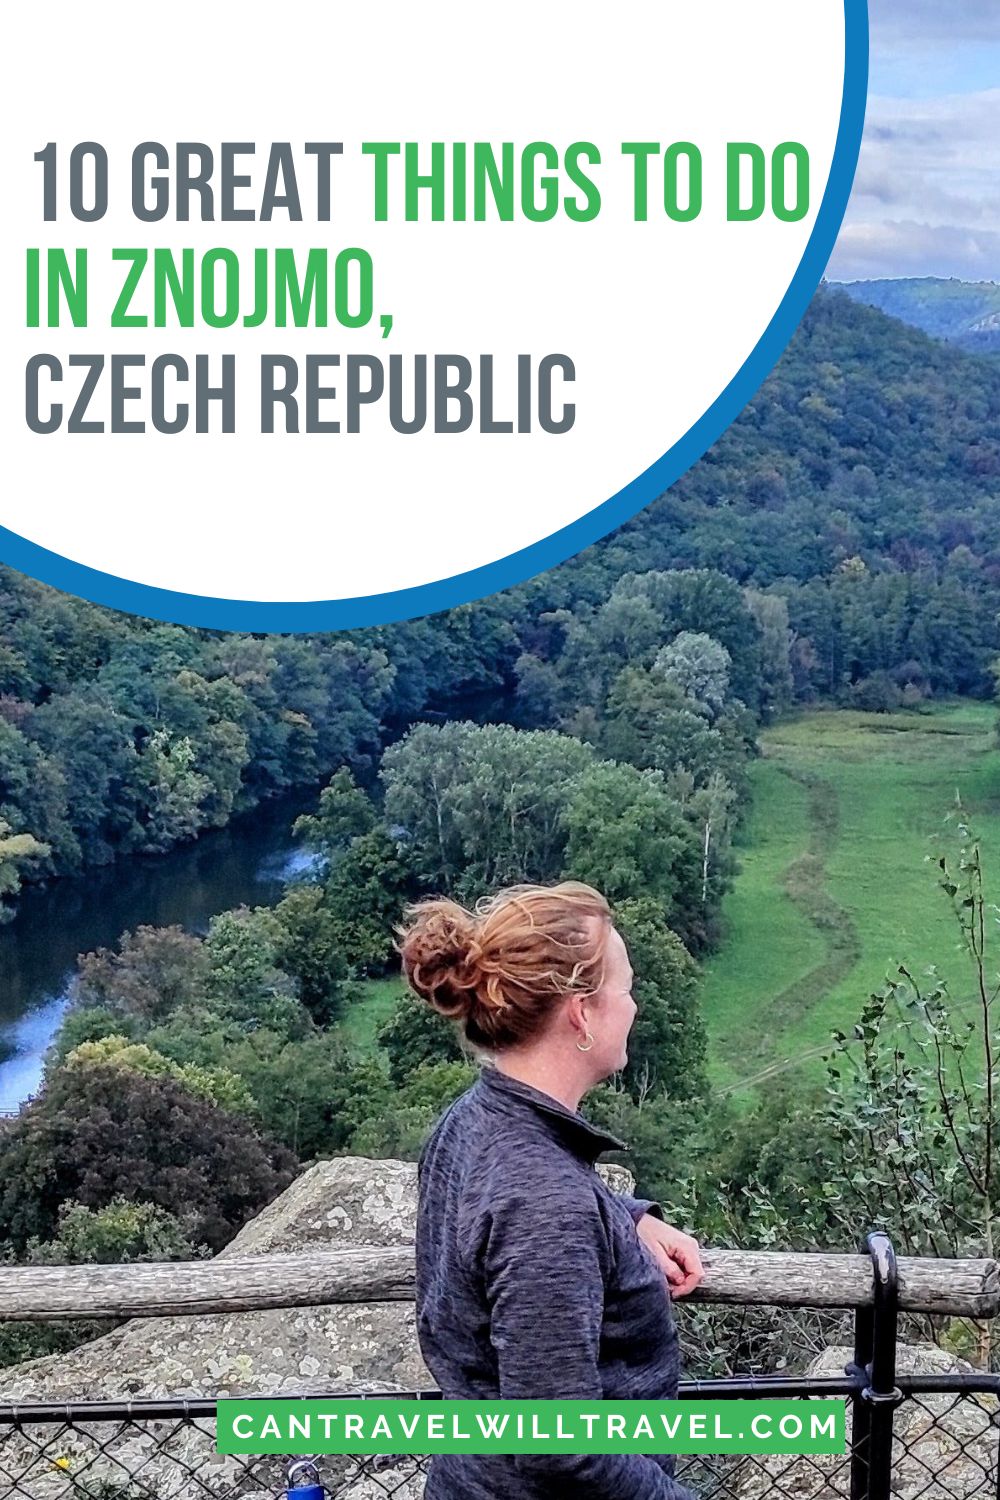 10 Great Things to Do in the Znojmo Region